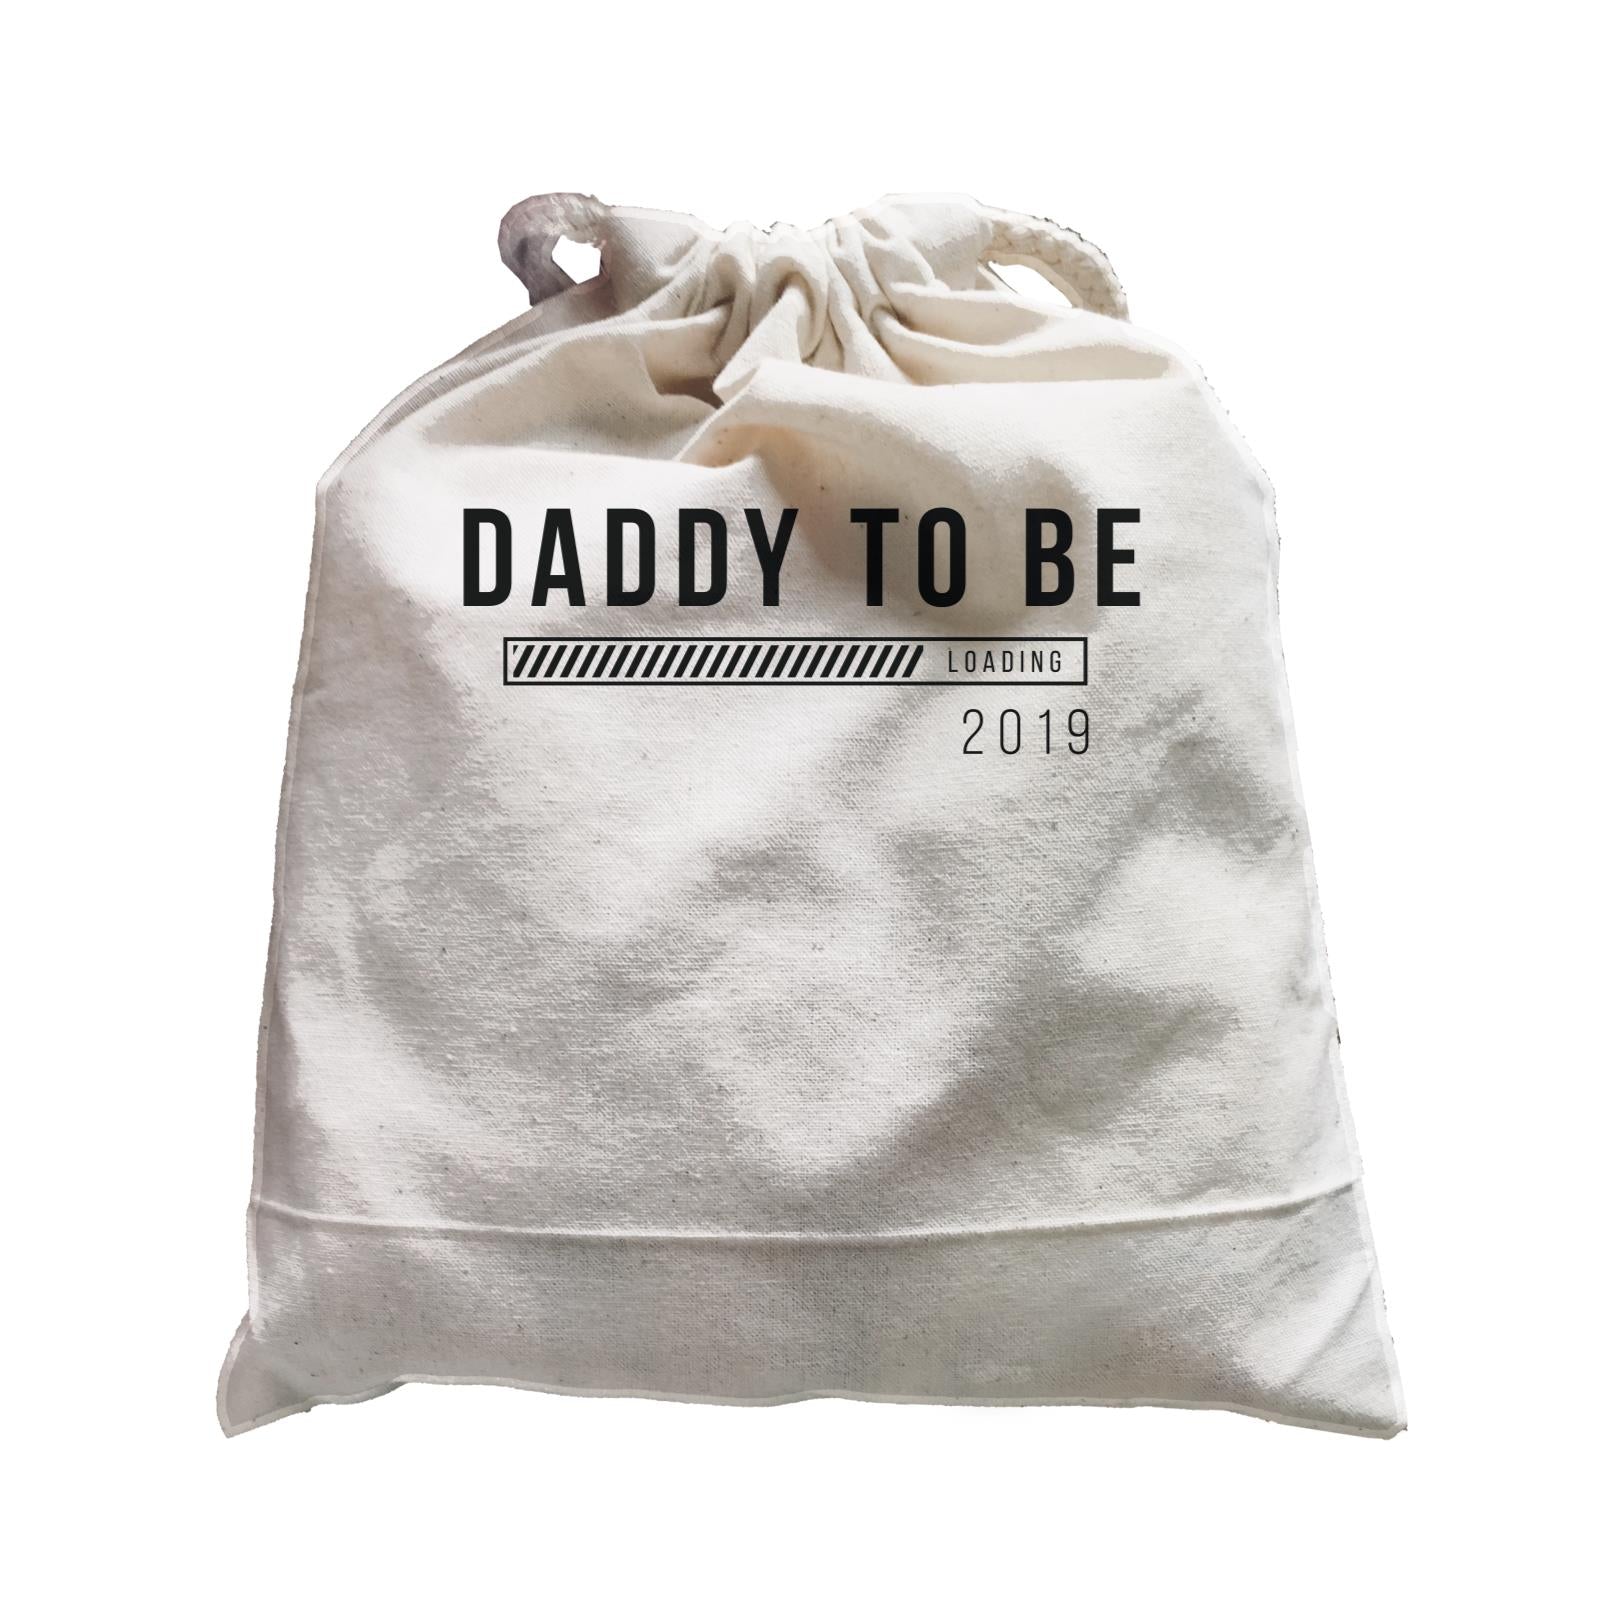 Coming Soon Family Daddy To Be Loading Add Date Satchel